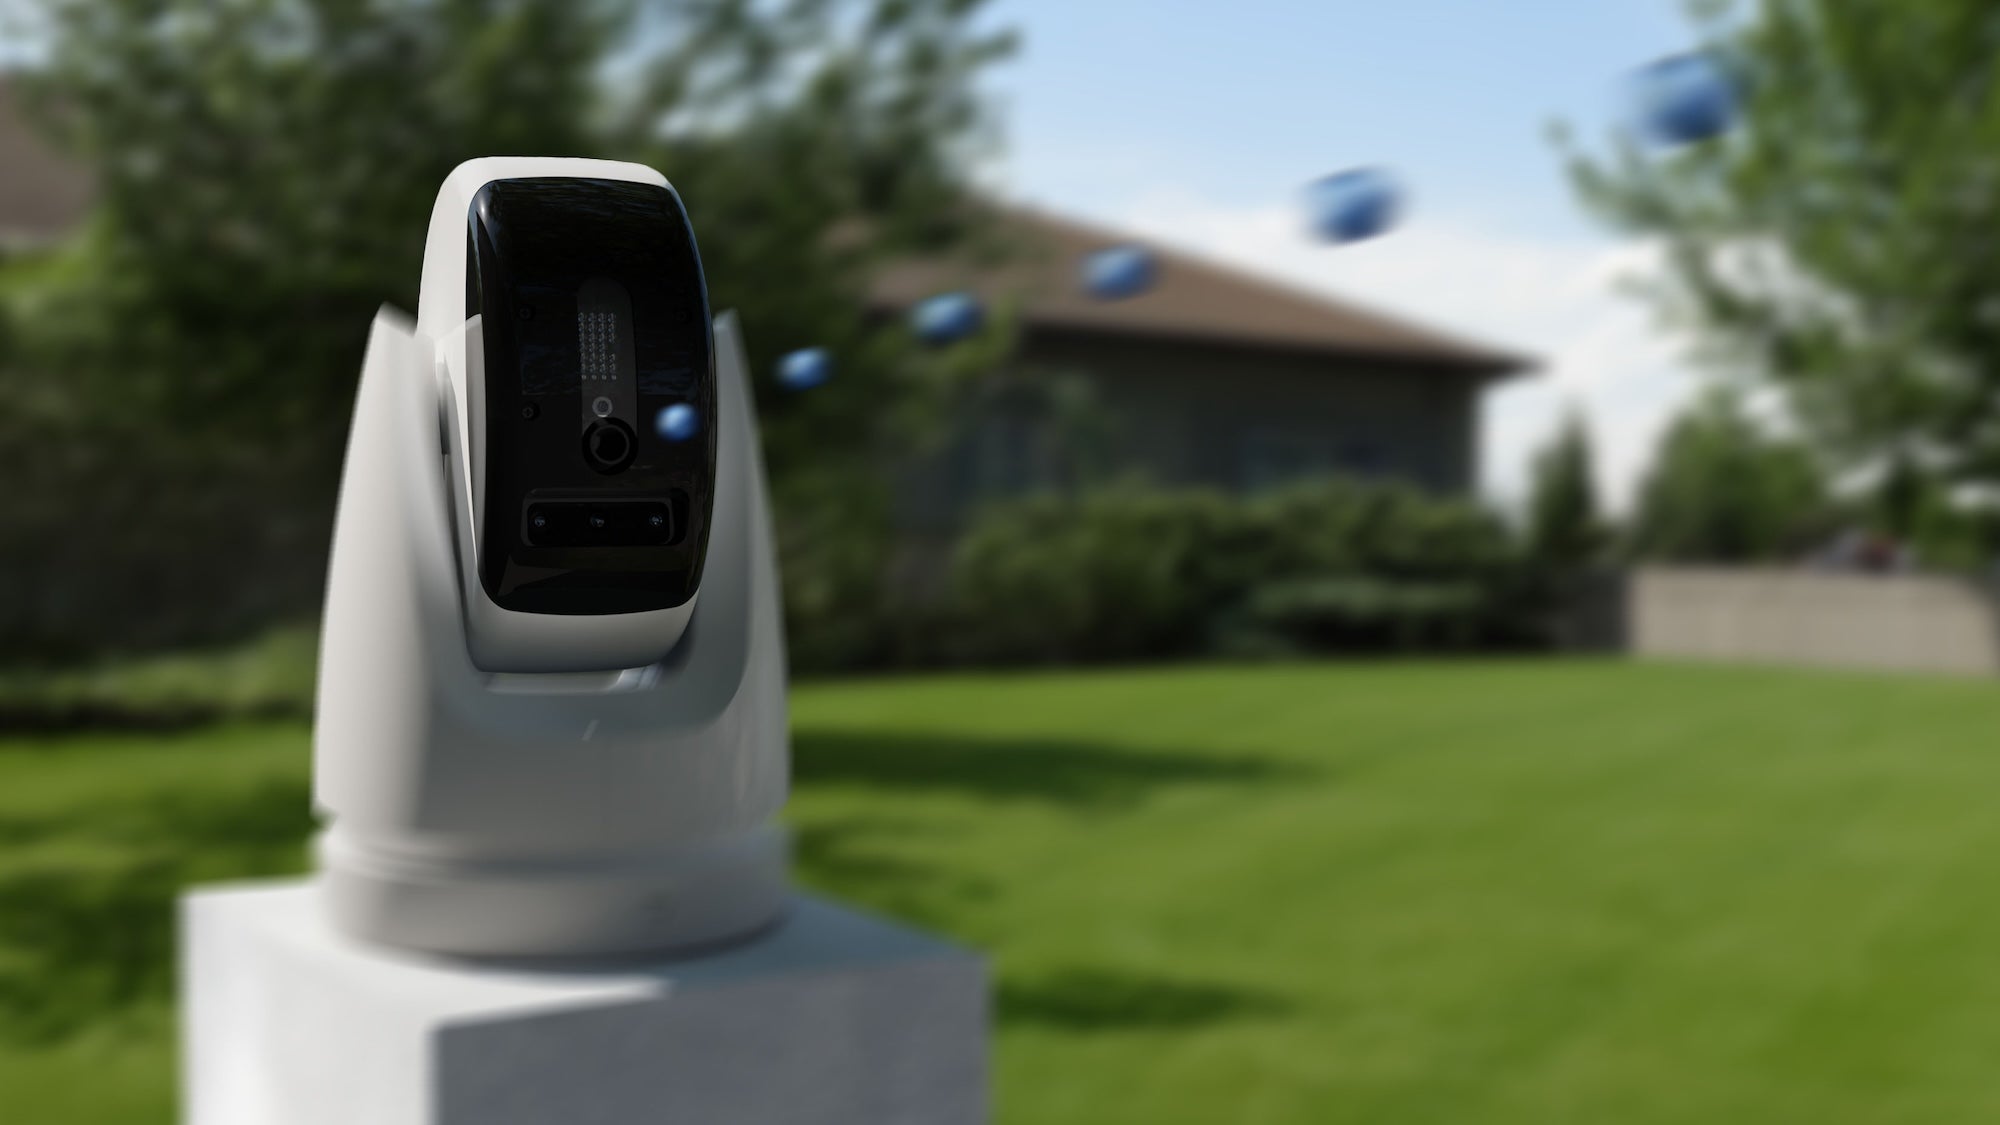 amazon, startup pitches a paintball-armed, ai-powered home security camera